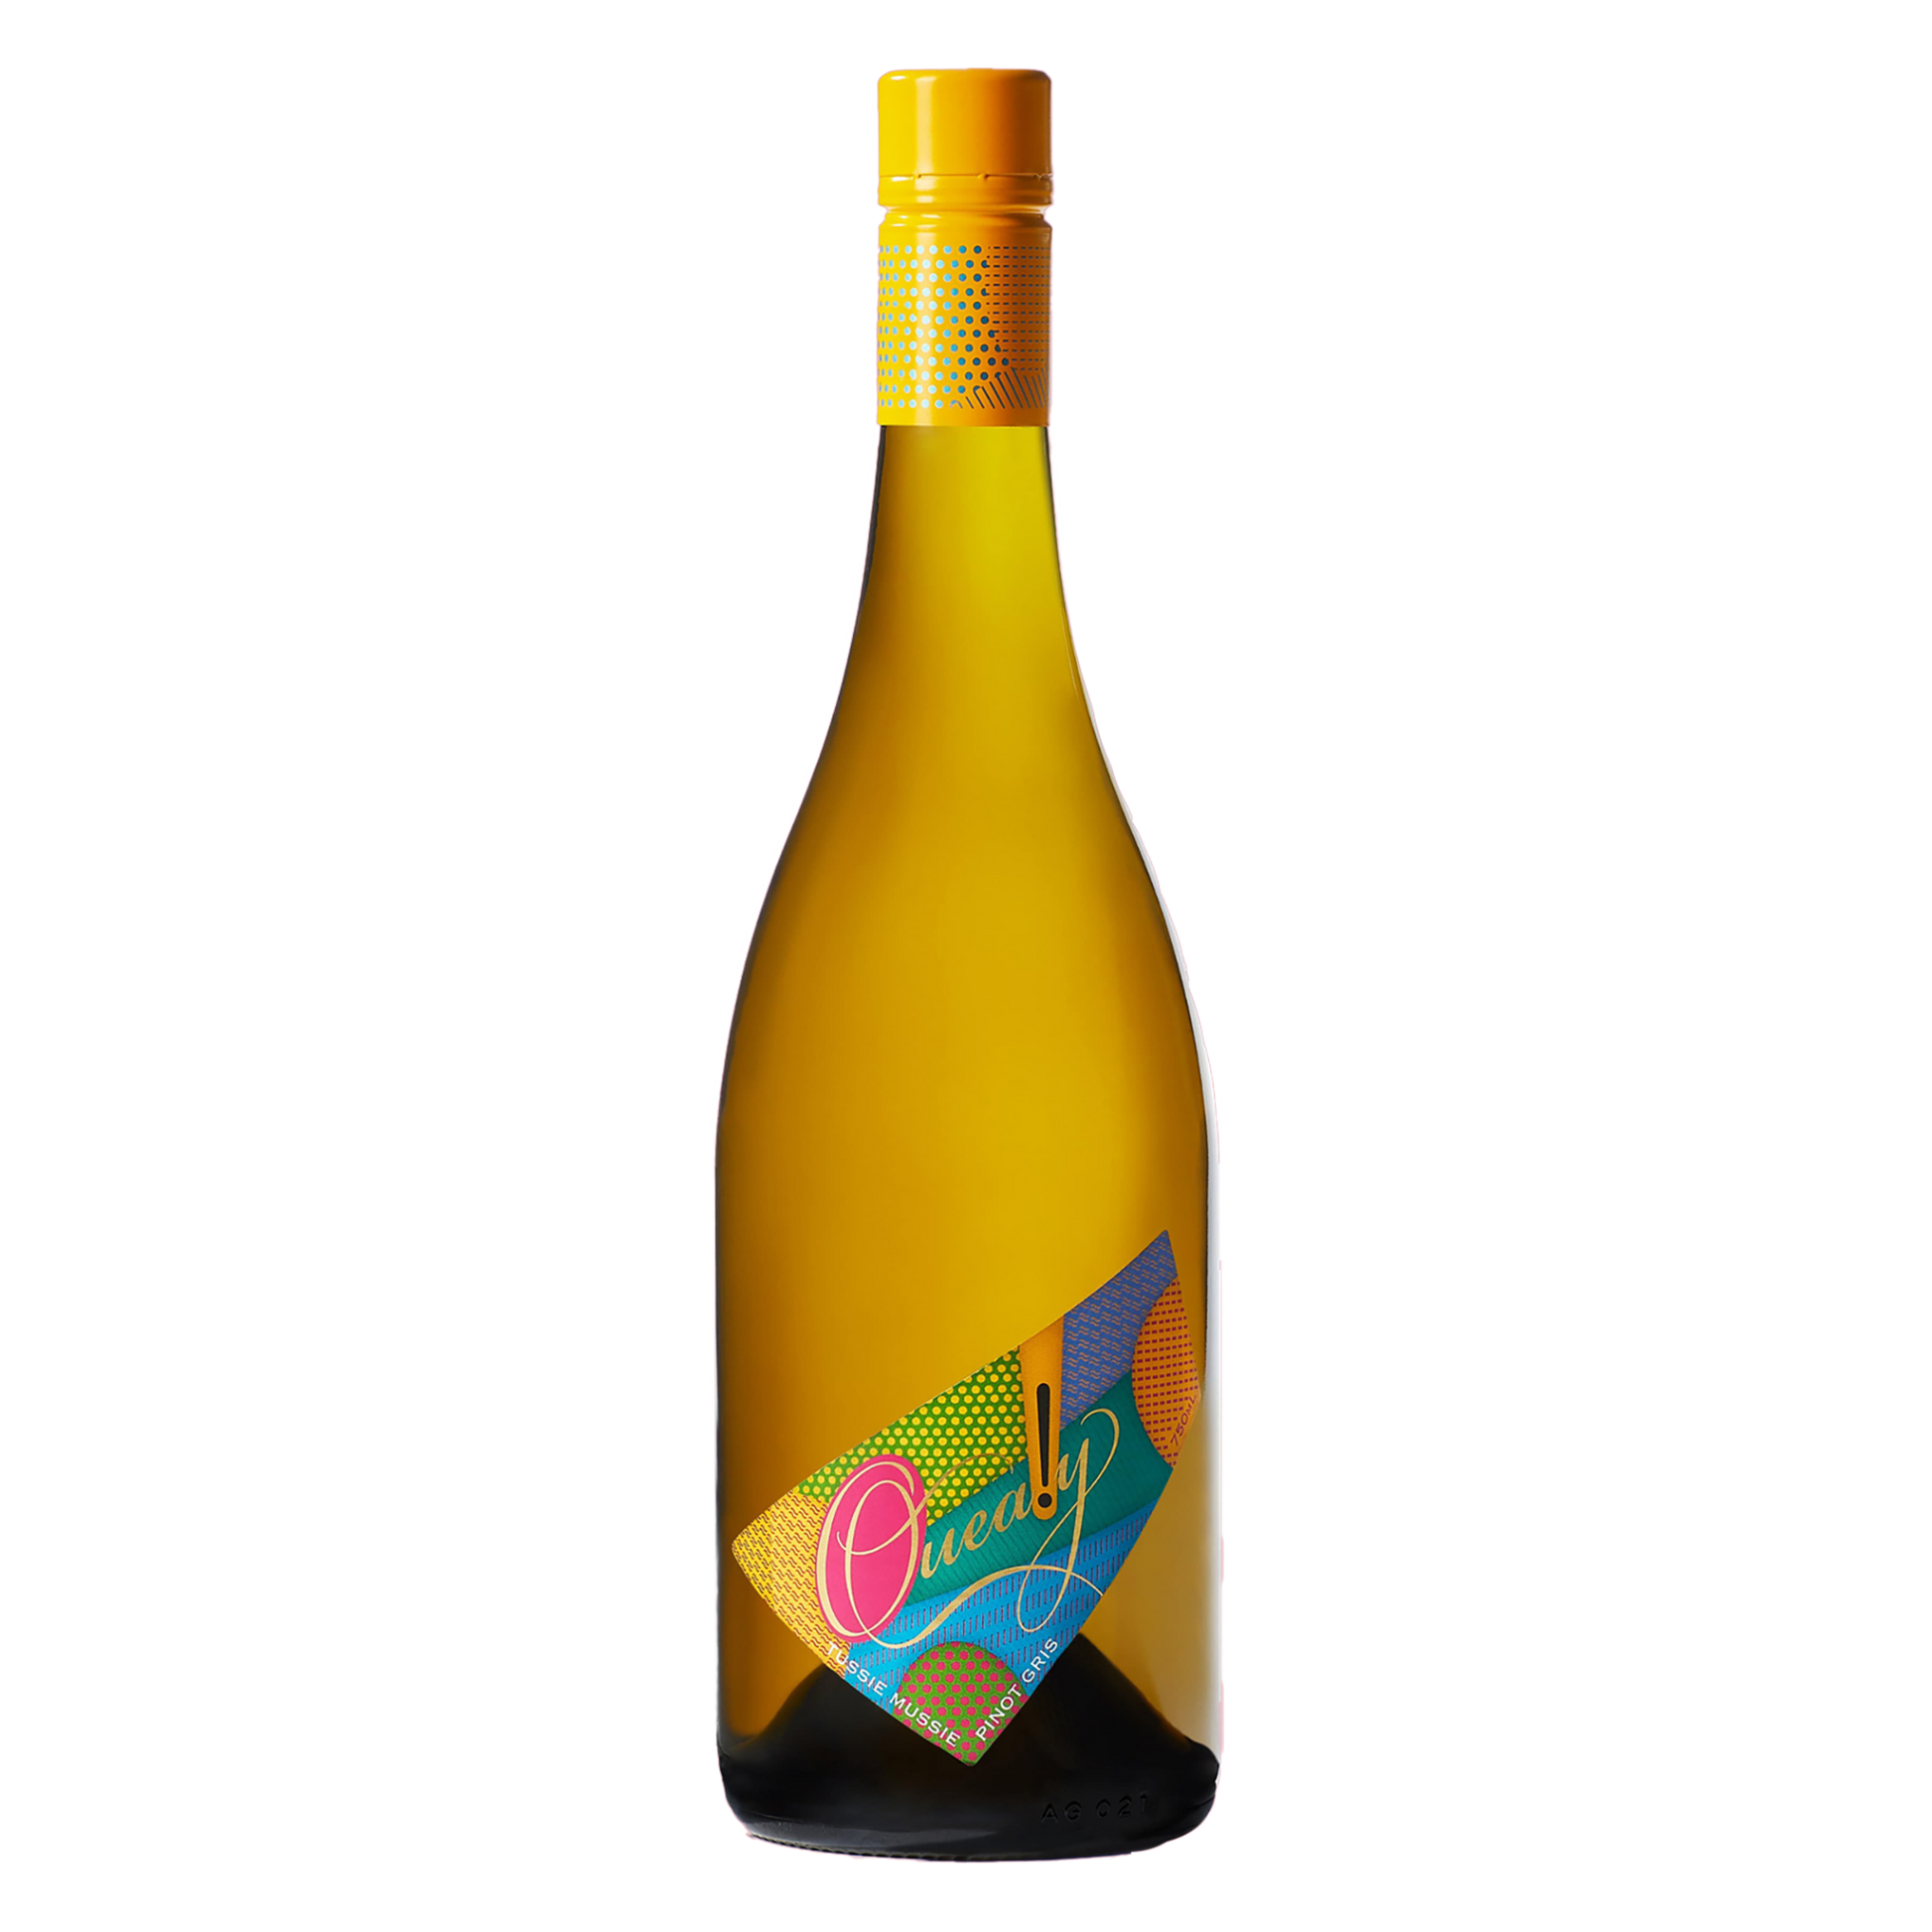 Quealy Tussie Mussie Pinot Gris 2021